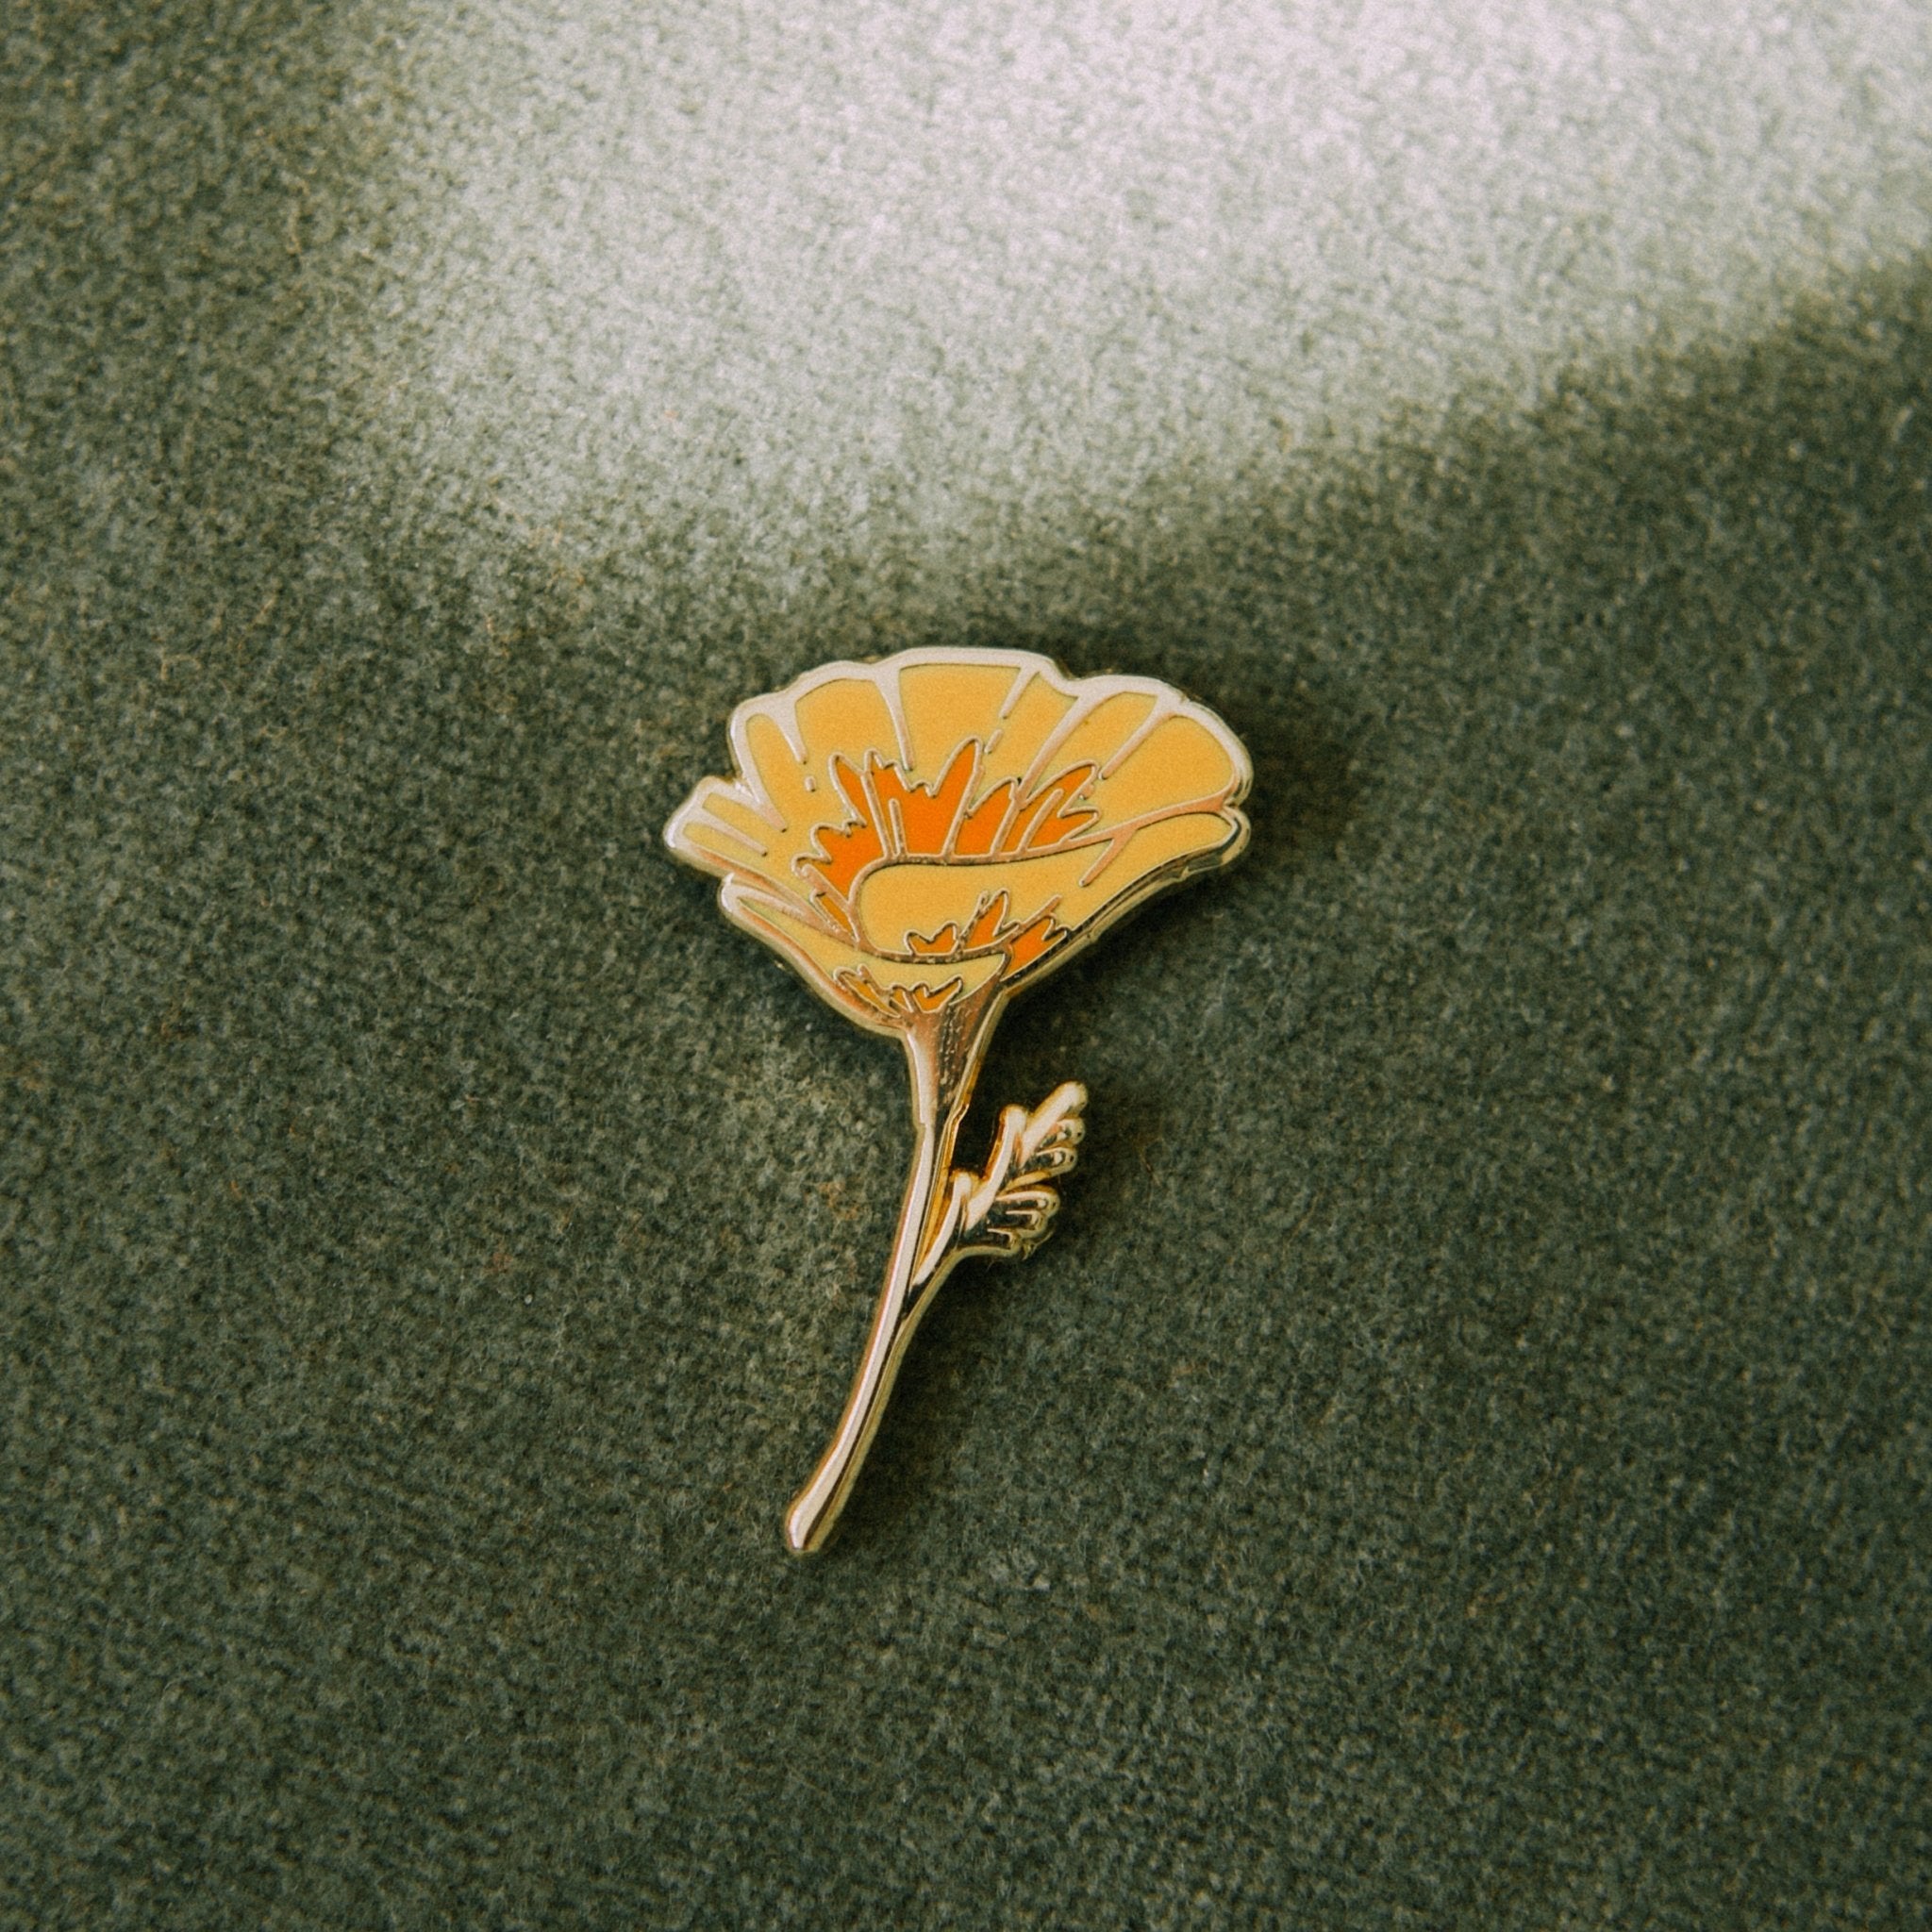 a hard enamel pin of an orange california poppy wildflower made from hard enamel and gold metal plating. a cute plant wildflower pin for backpacks, totes, hats, lapels, and jackets